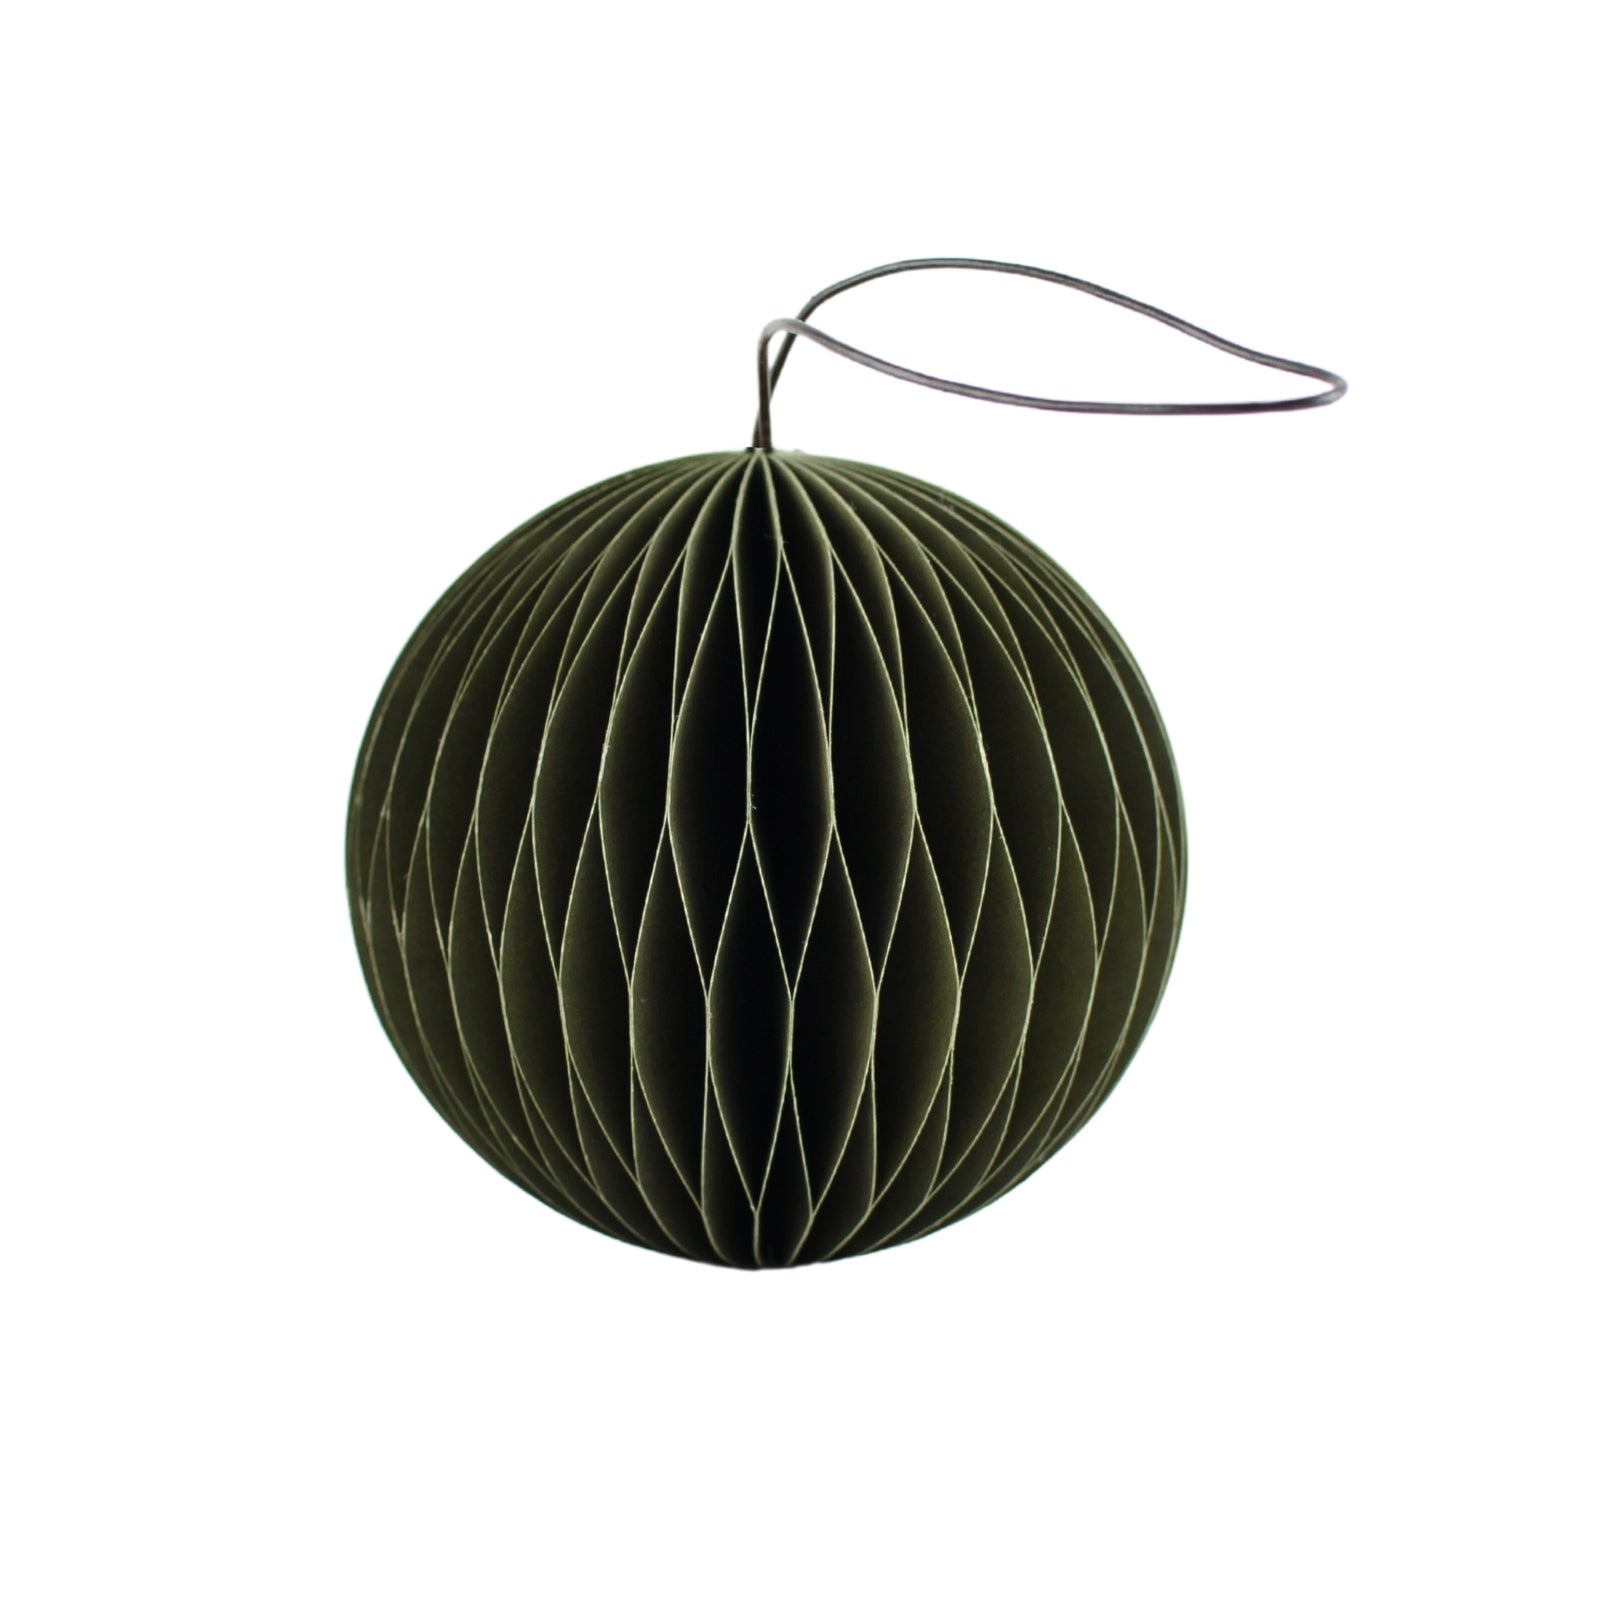 Olive Green sphere ornament on a plain white background